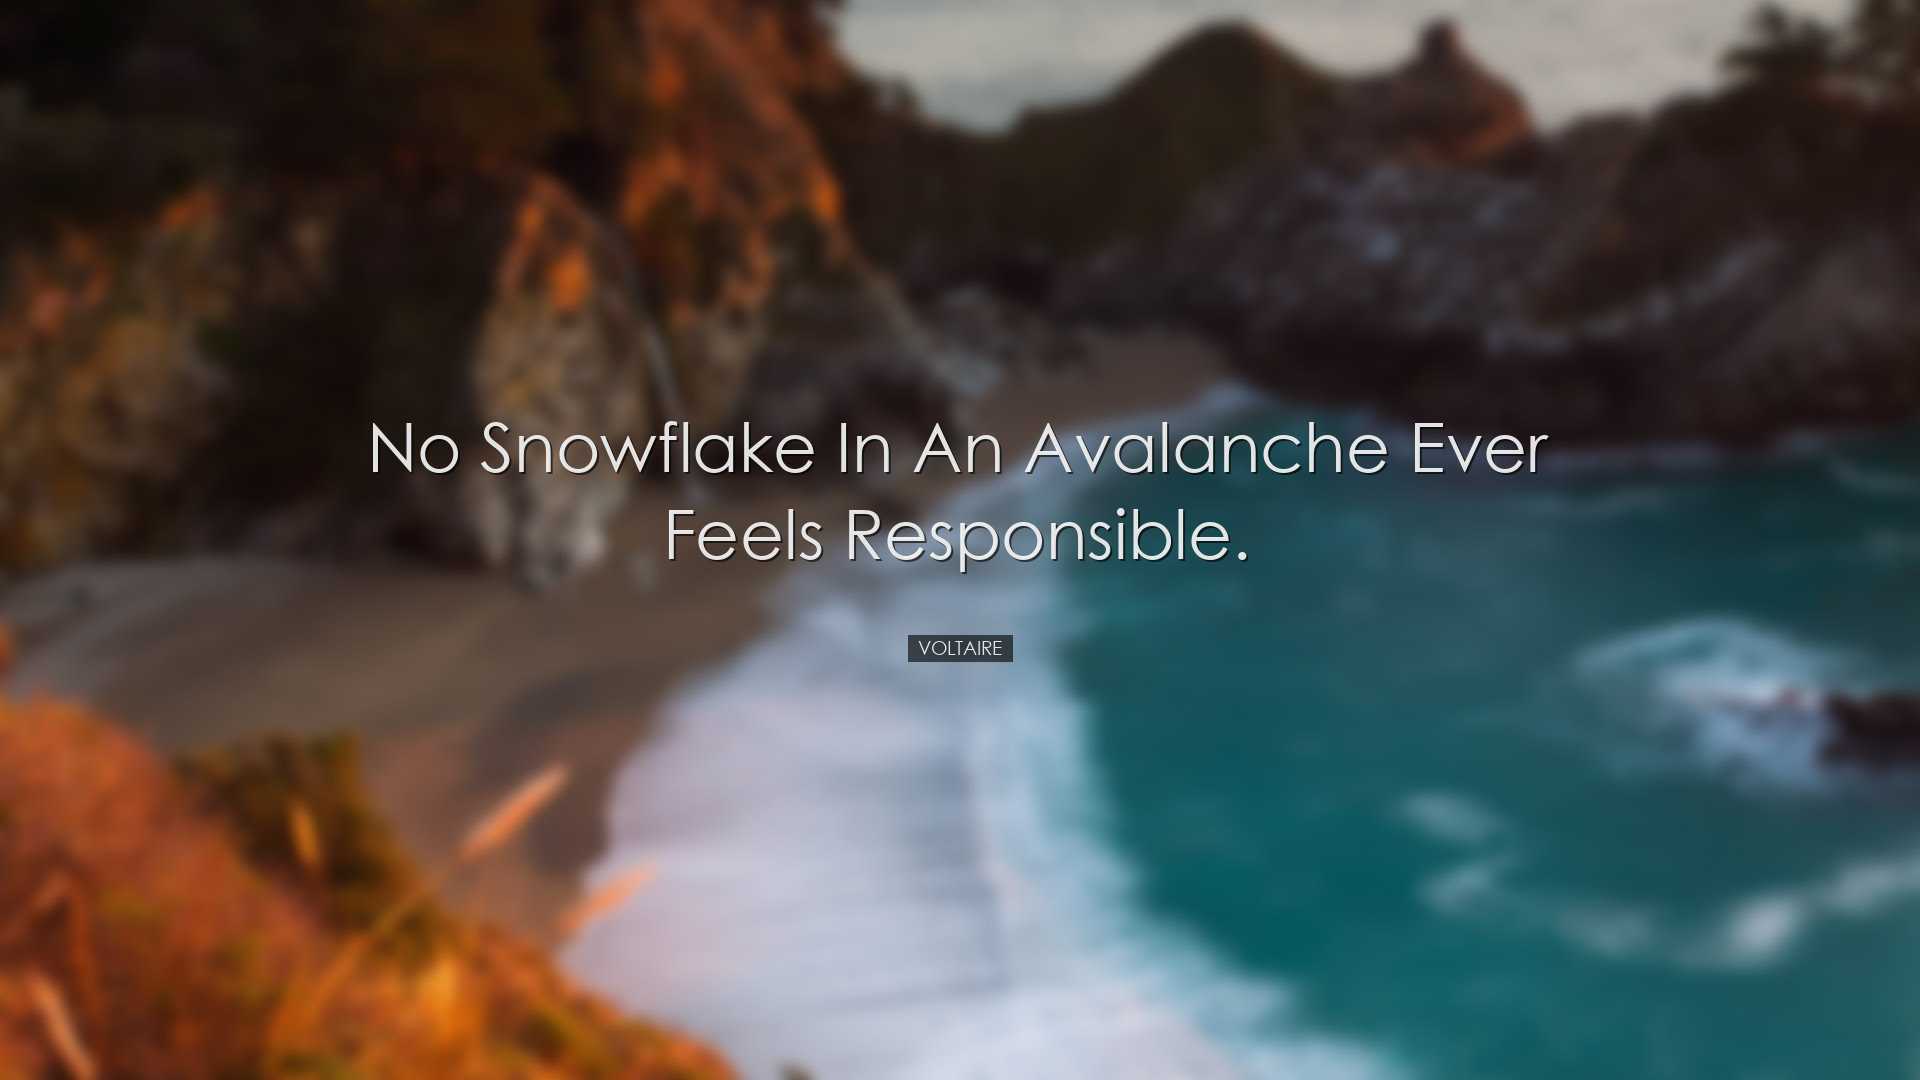 No snowflake in an avalanche ever feels responsible. - Voltaire